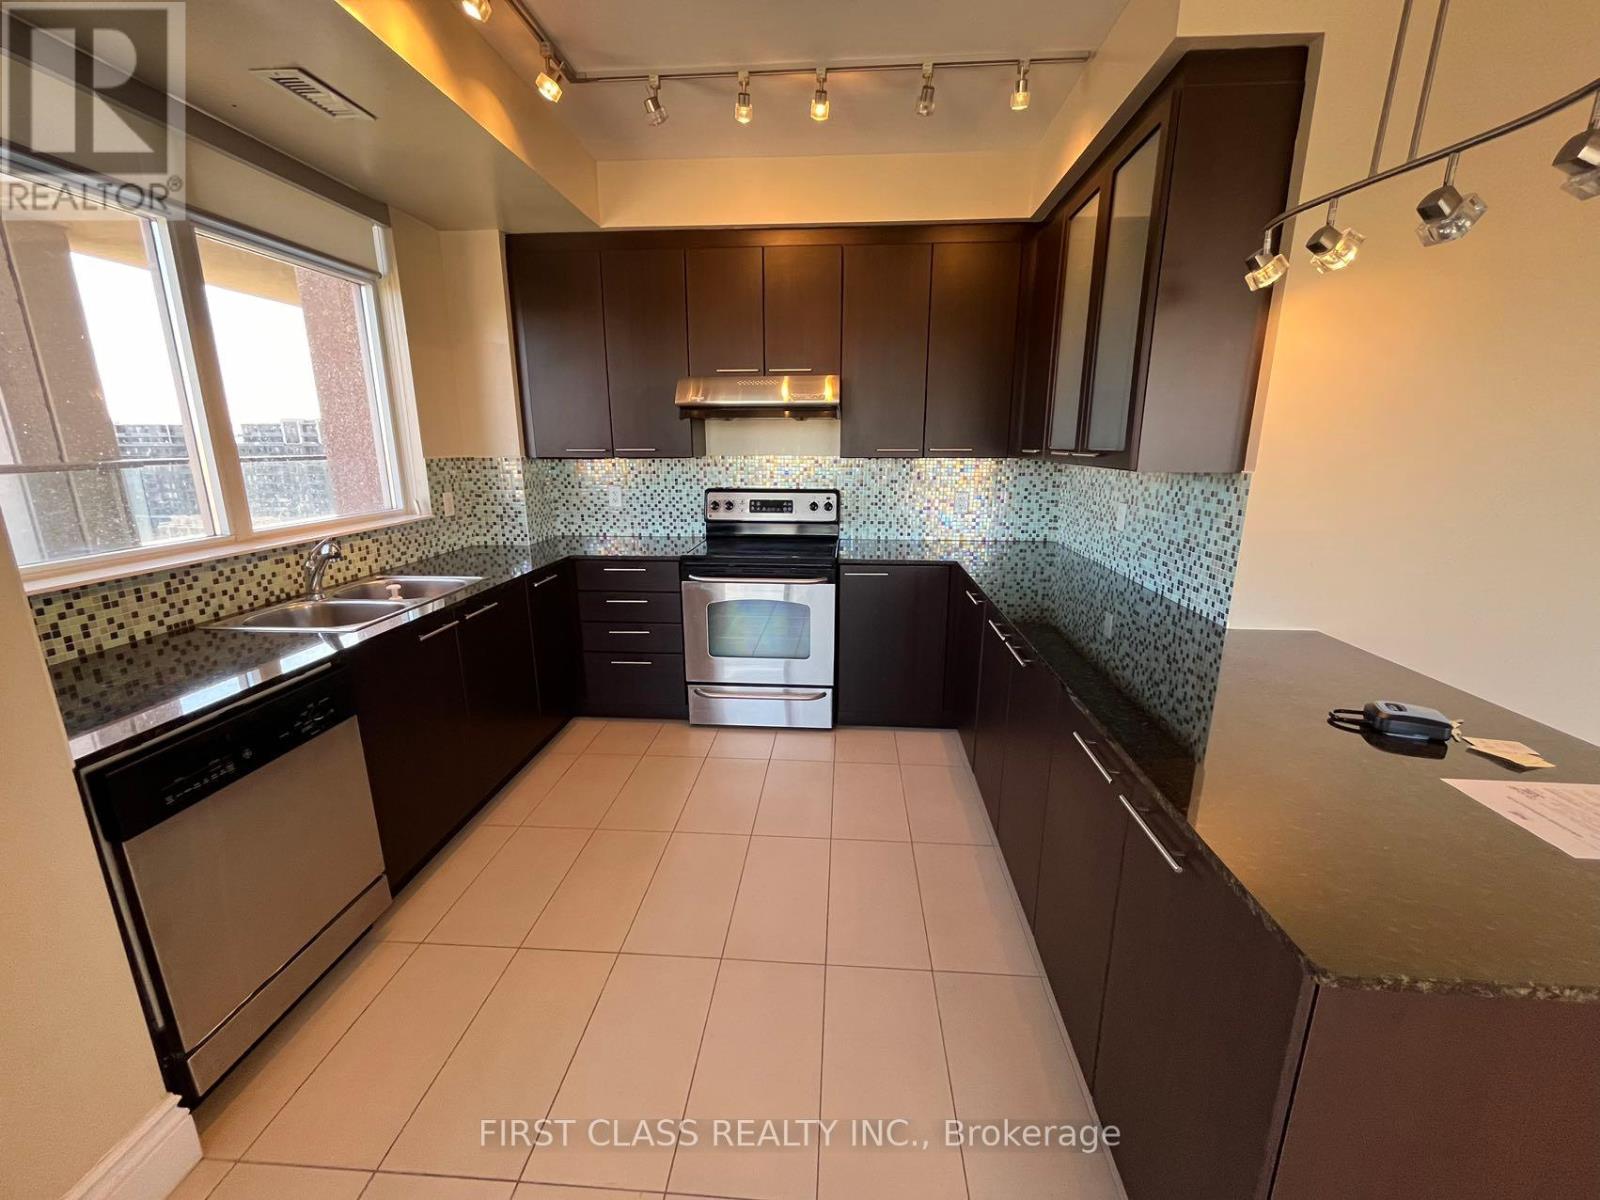 For Sale in Markham - Lph2 - 39 Galleria Parkway, Markham, Ontario  L3T 0A6 - Photo 6 - N8187756